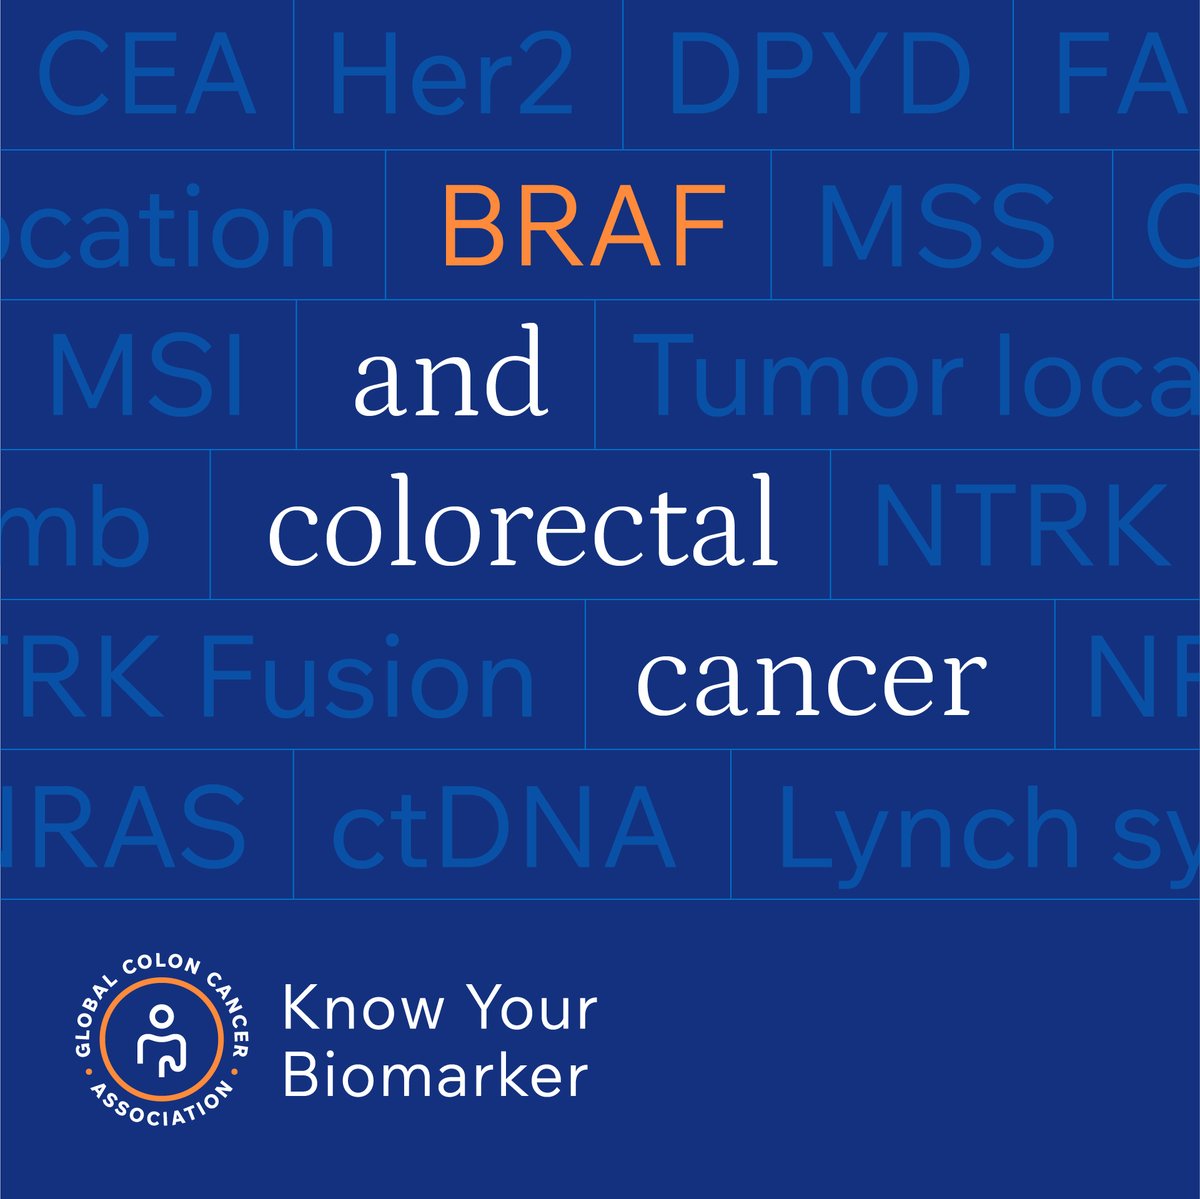 BRAF is a predictive biomarker which means it gives information about which treatments will work best for a particular cancer. Learn more about BRAF at gcca.info/KYB_BRAF_ #linkinbio #knowyourbiomarker #colorectalcancer #braf #brafv600e